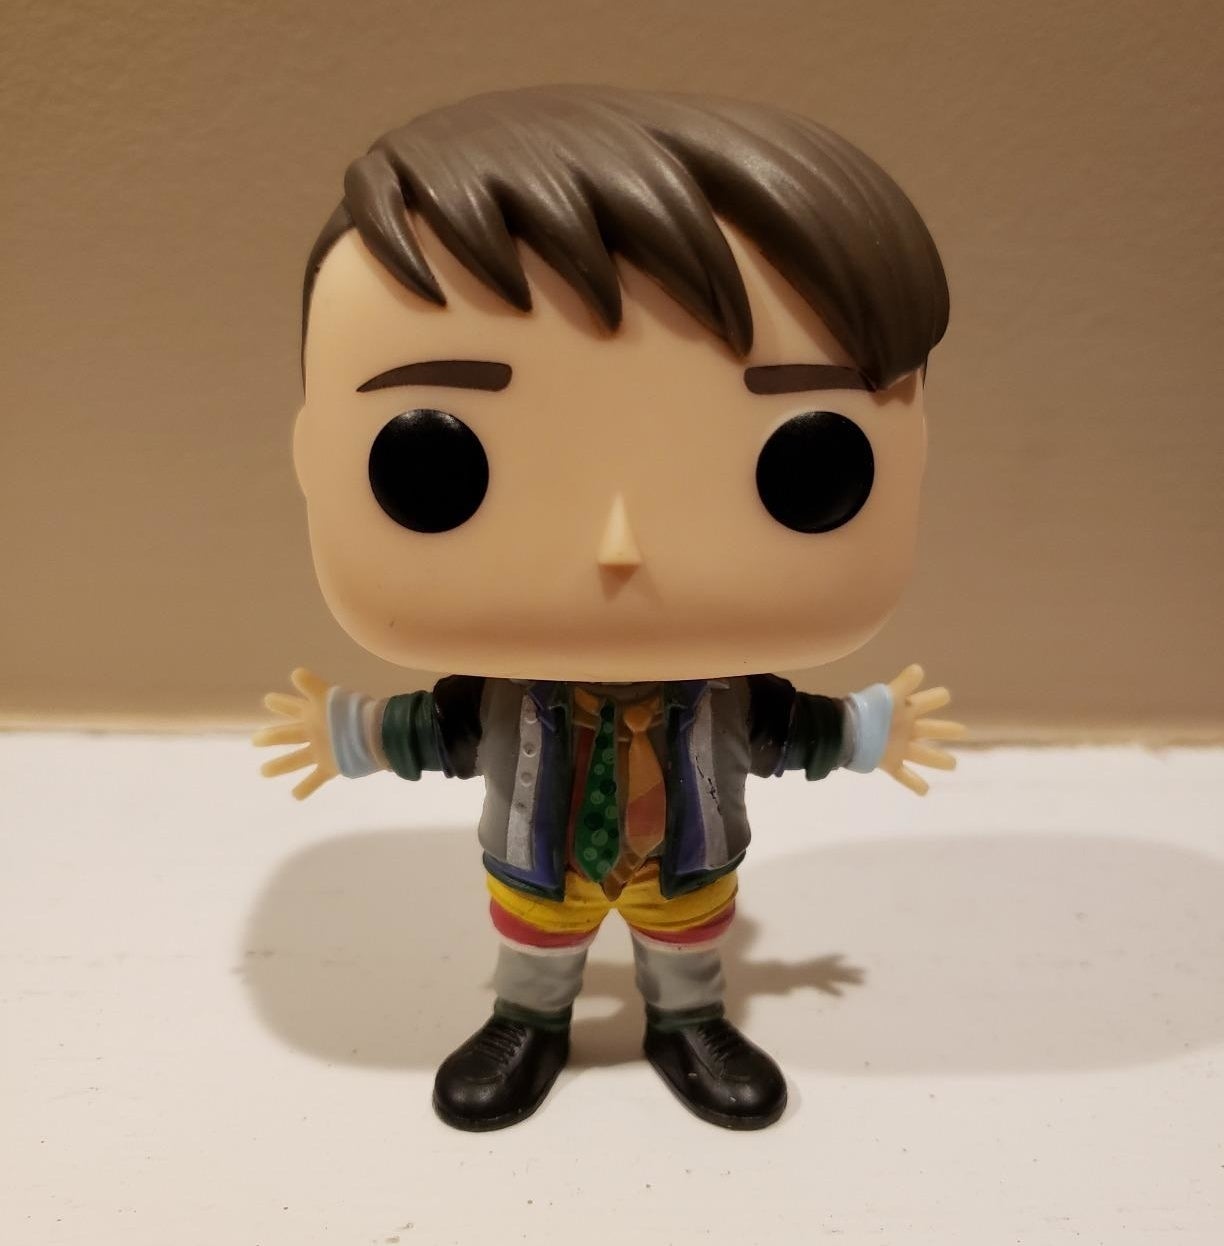 the joey funko wearing layers of clothing